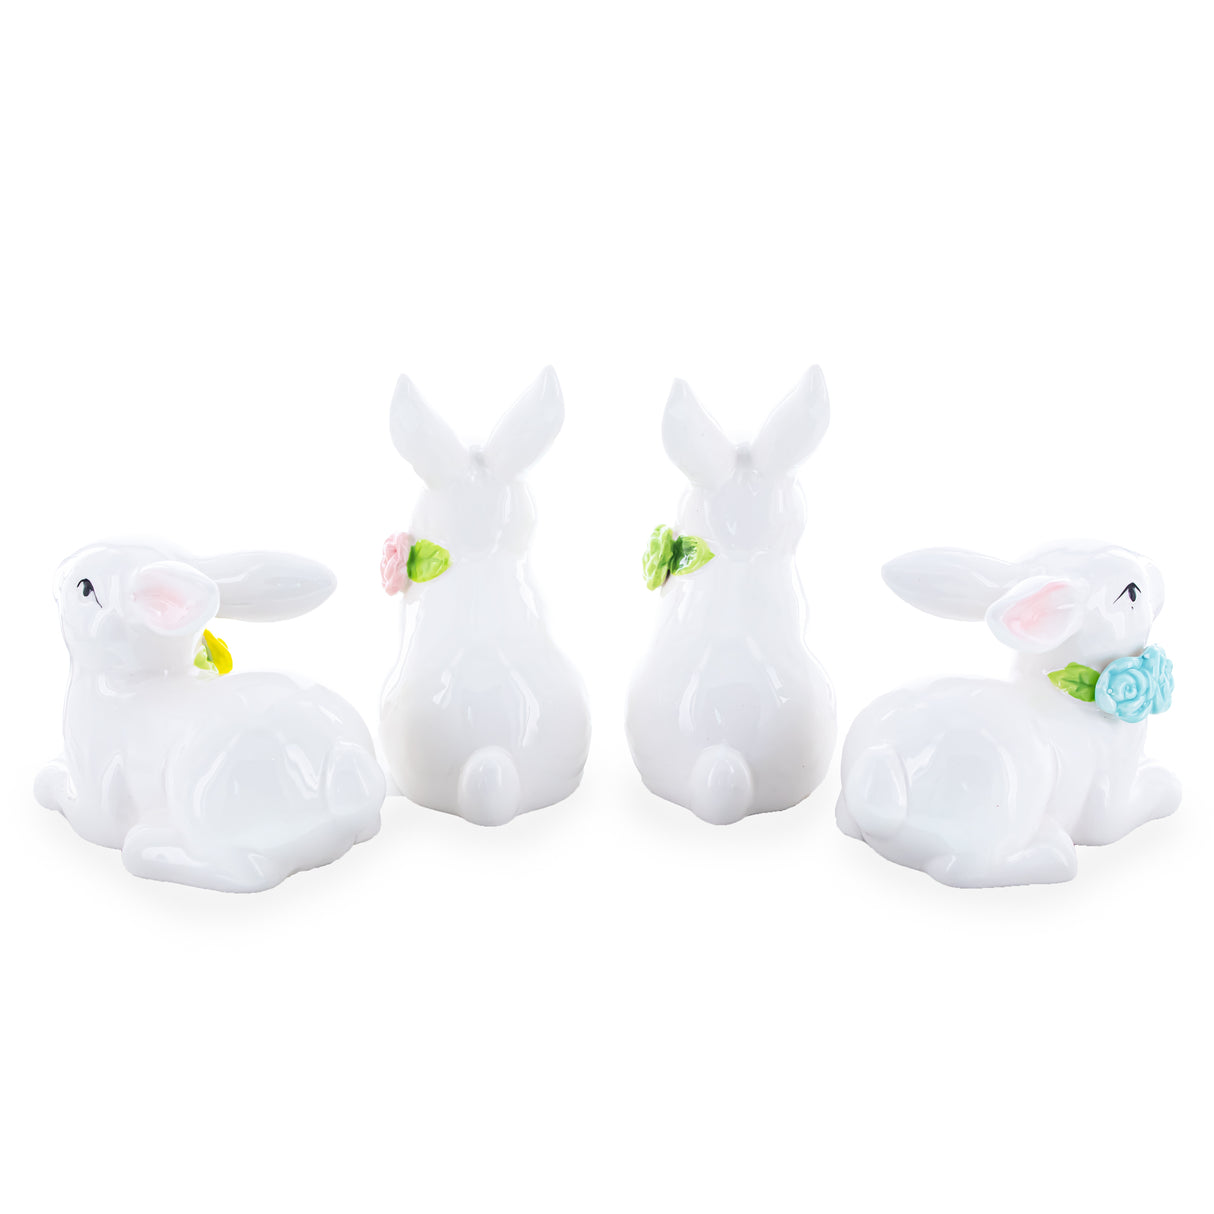 Set of 4 Porcelain Easter Bunnies 4 Inches ,dimensions in inches: 4 x 3 x 2.5